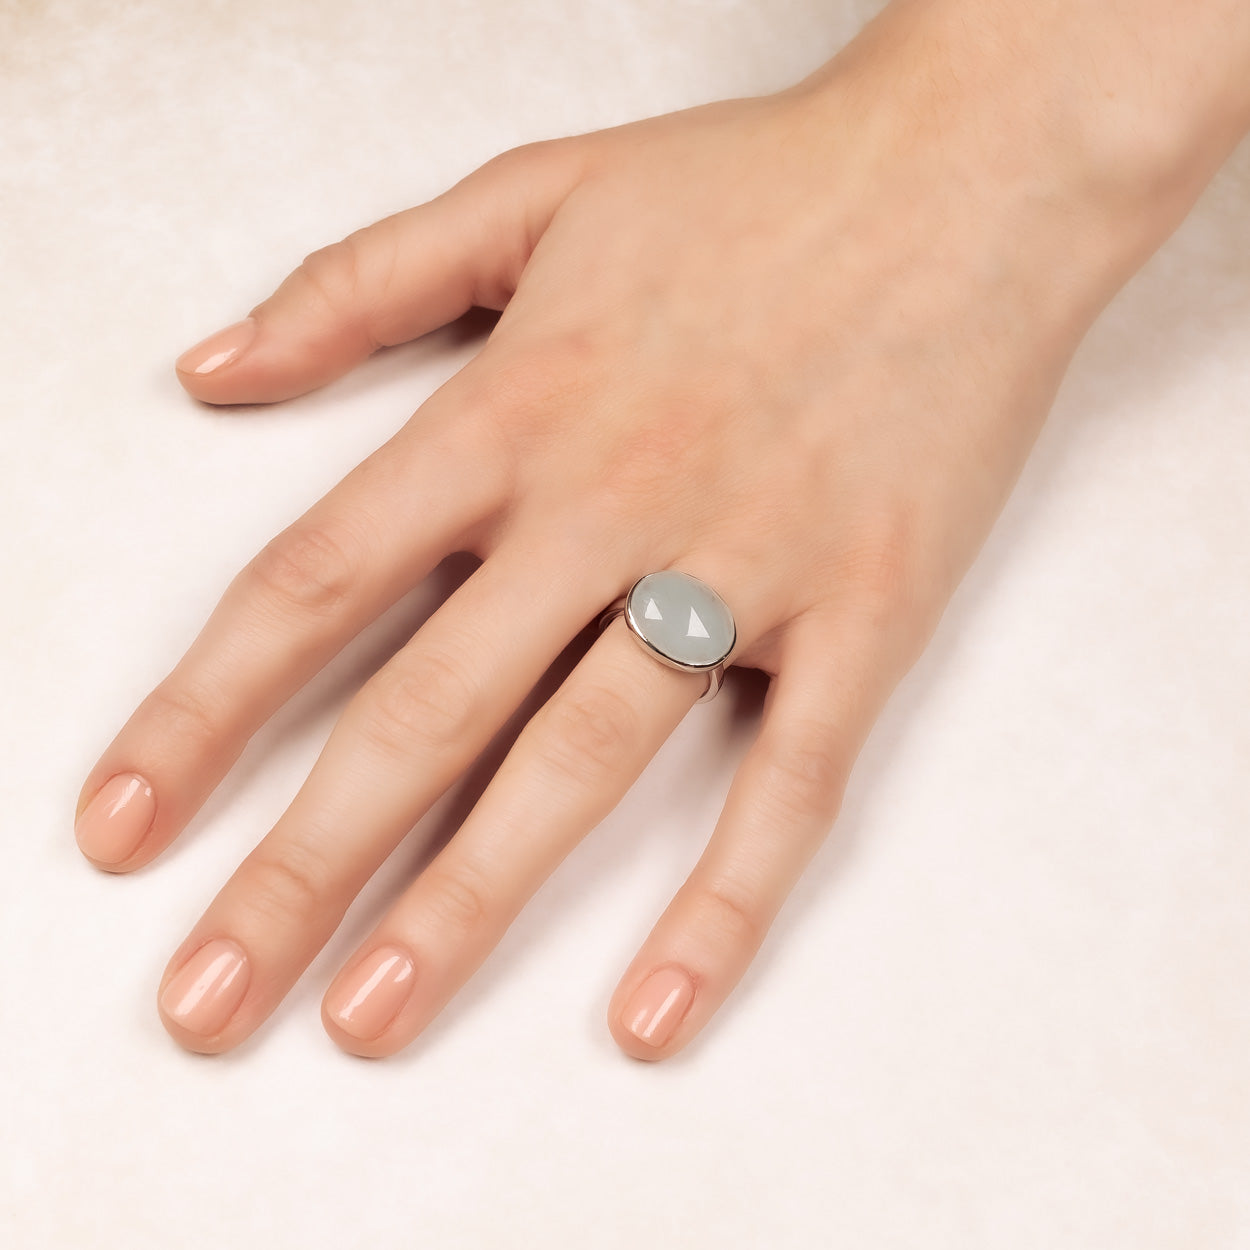 Discover more than 213 aqua chalcedony ring